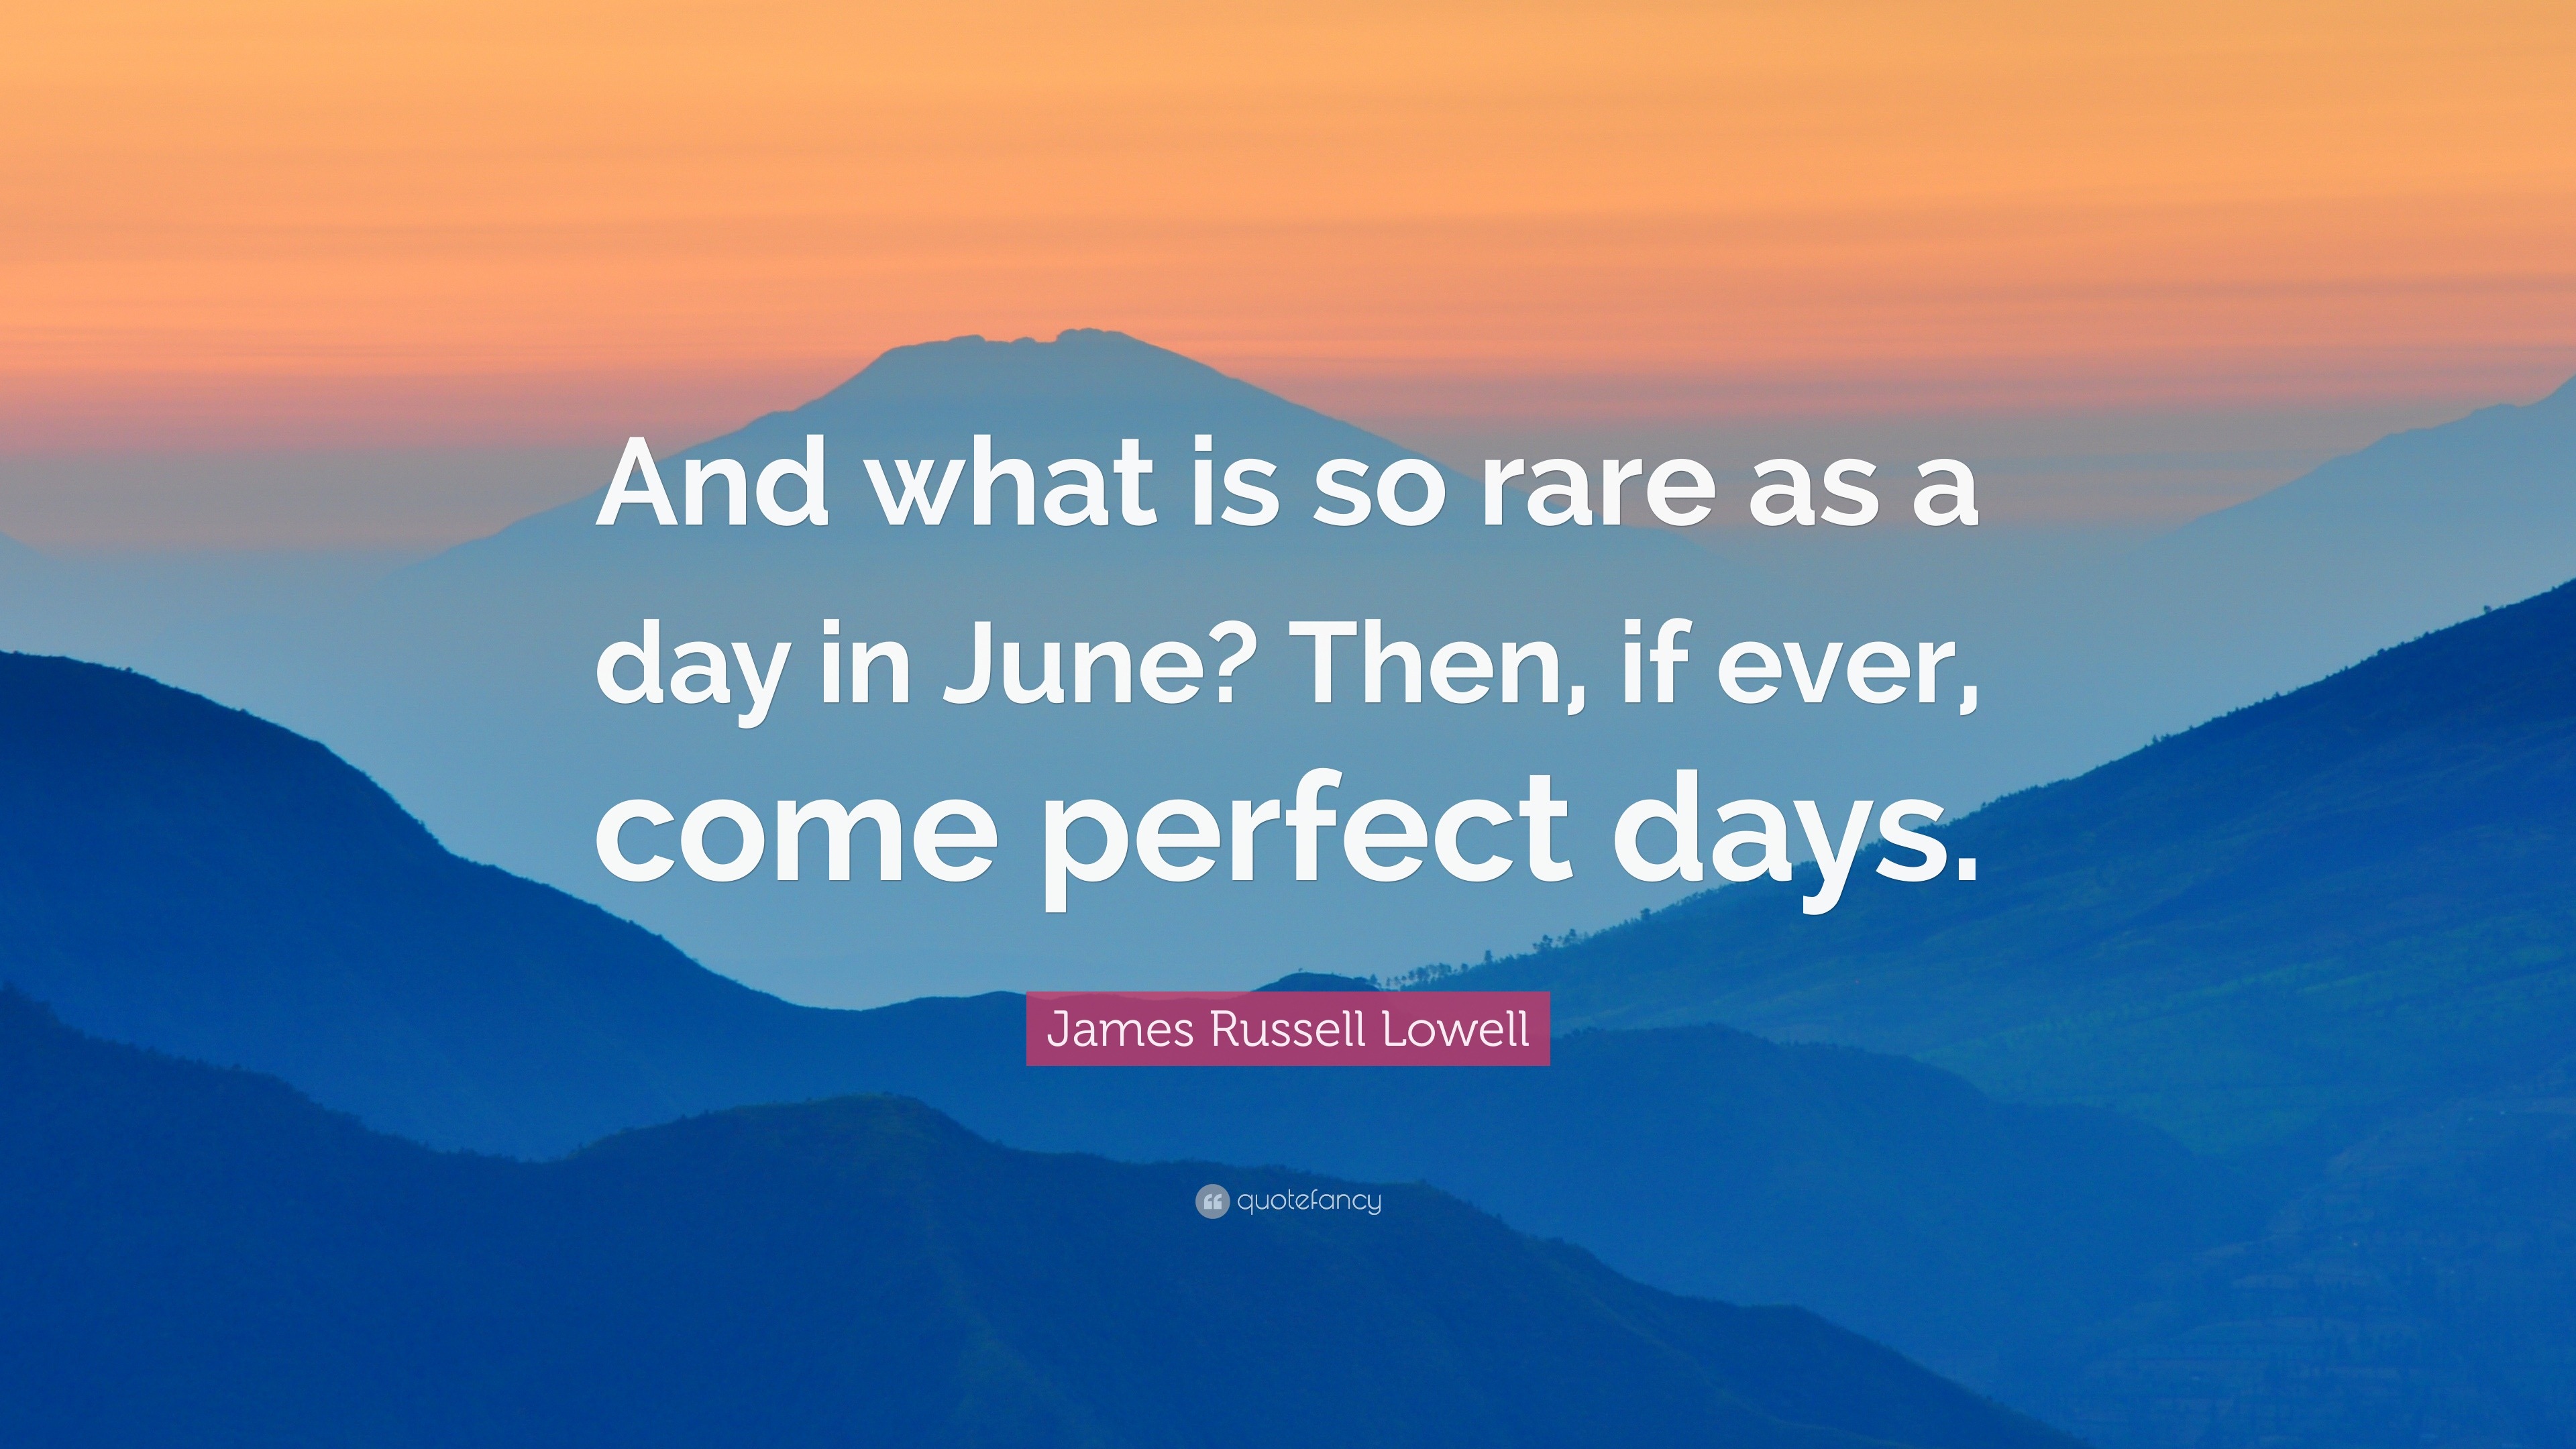 James Russell Lowell Quote: “And what is so rare as a day in June? Then, if